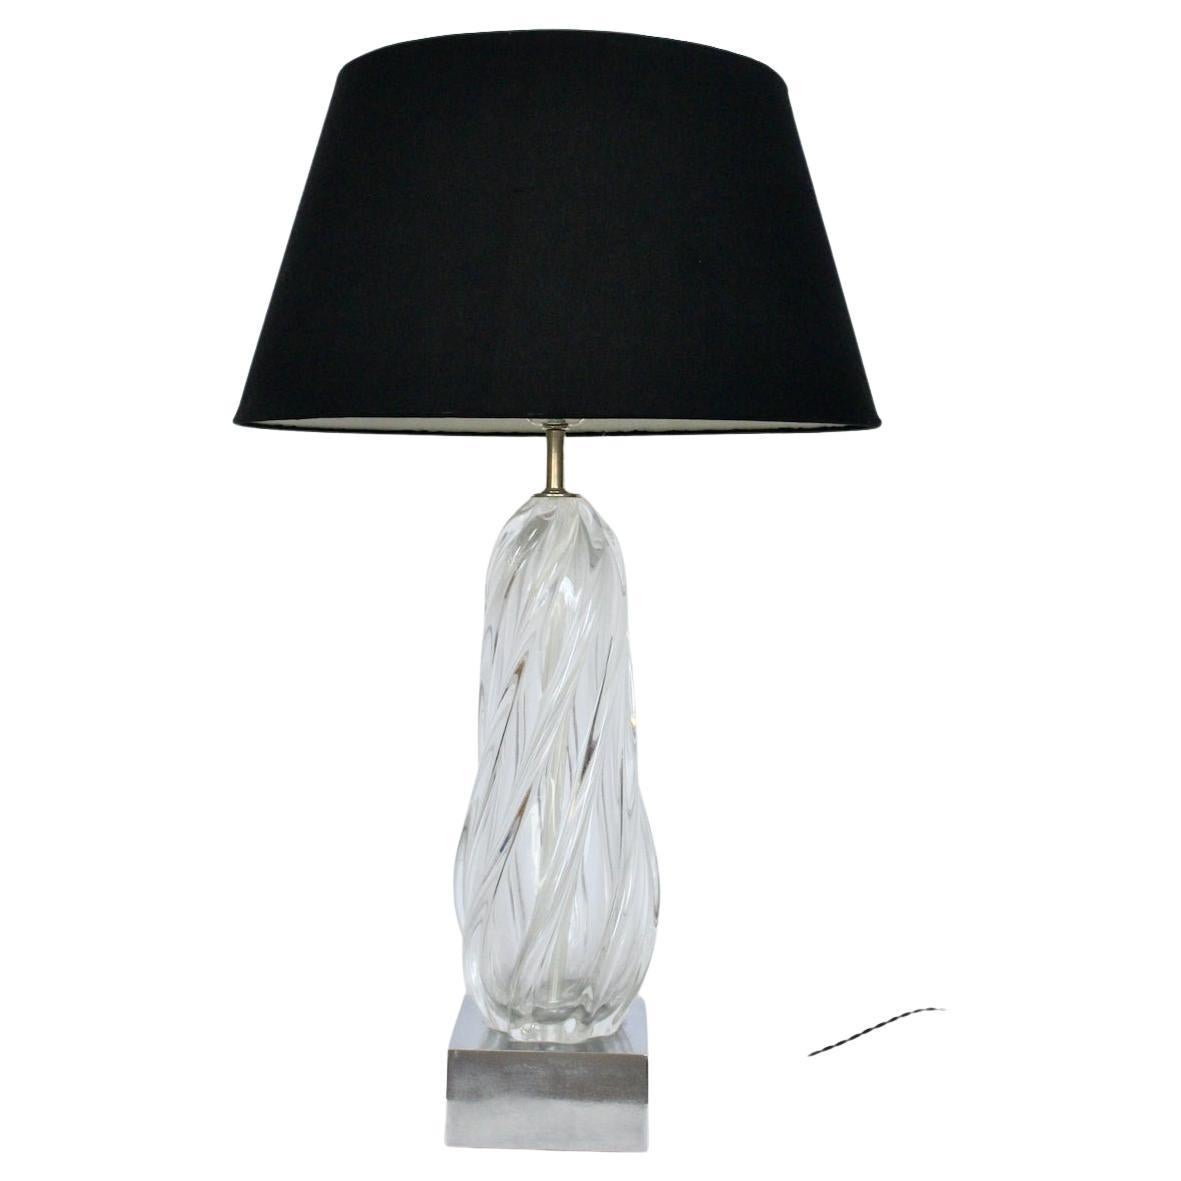 Substantial handcrafted transparent Seguso murano glass scalloped table lamp. Featuring a clear heavy, thick and smoothly ribbed hand blown glass atop a (6 W x 6 D x 3 H) square textured chrome plated block base. 33 H to top of finial. 25H to top of